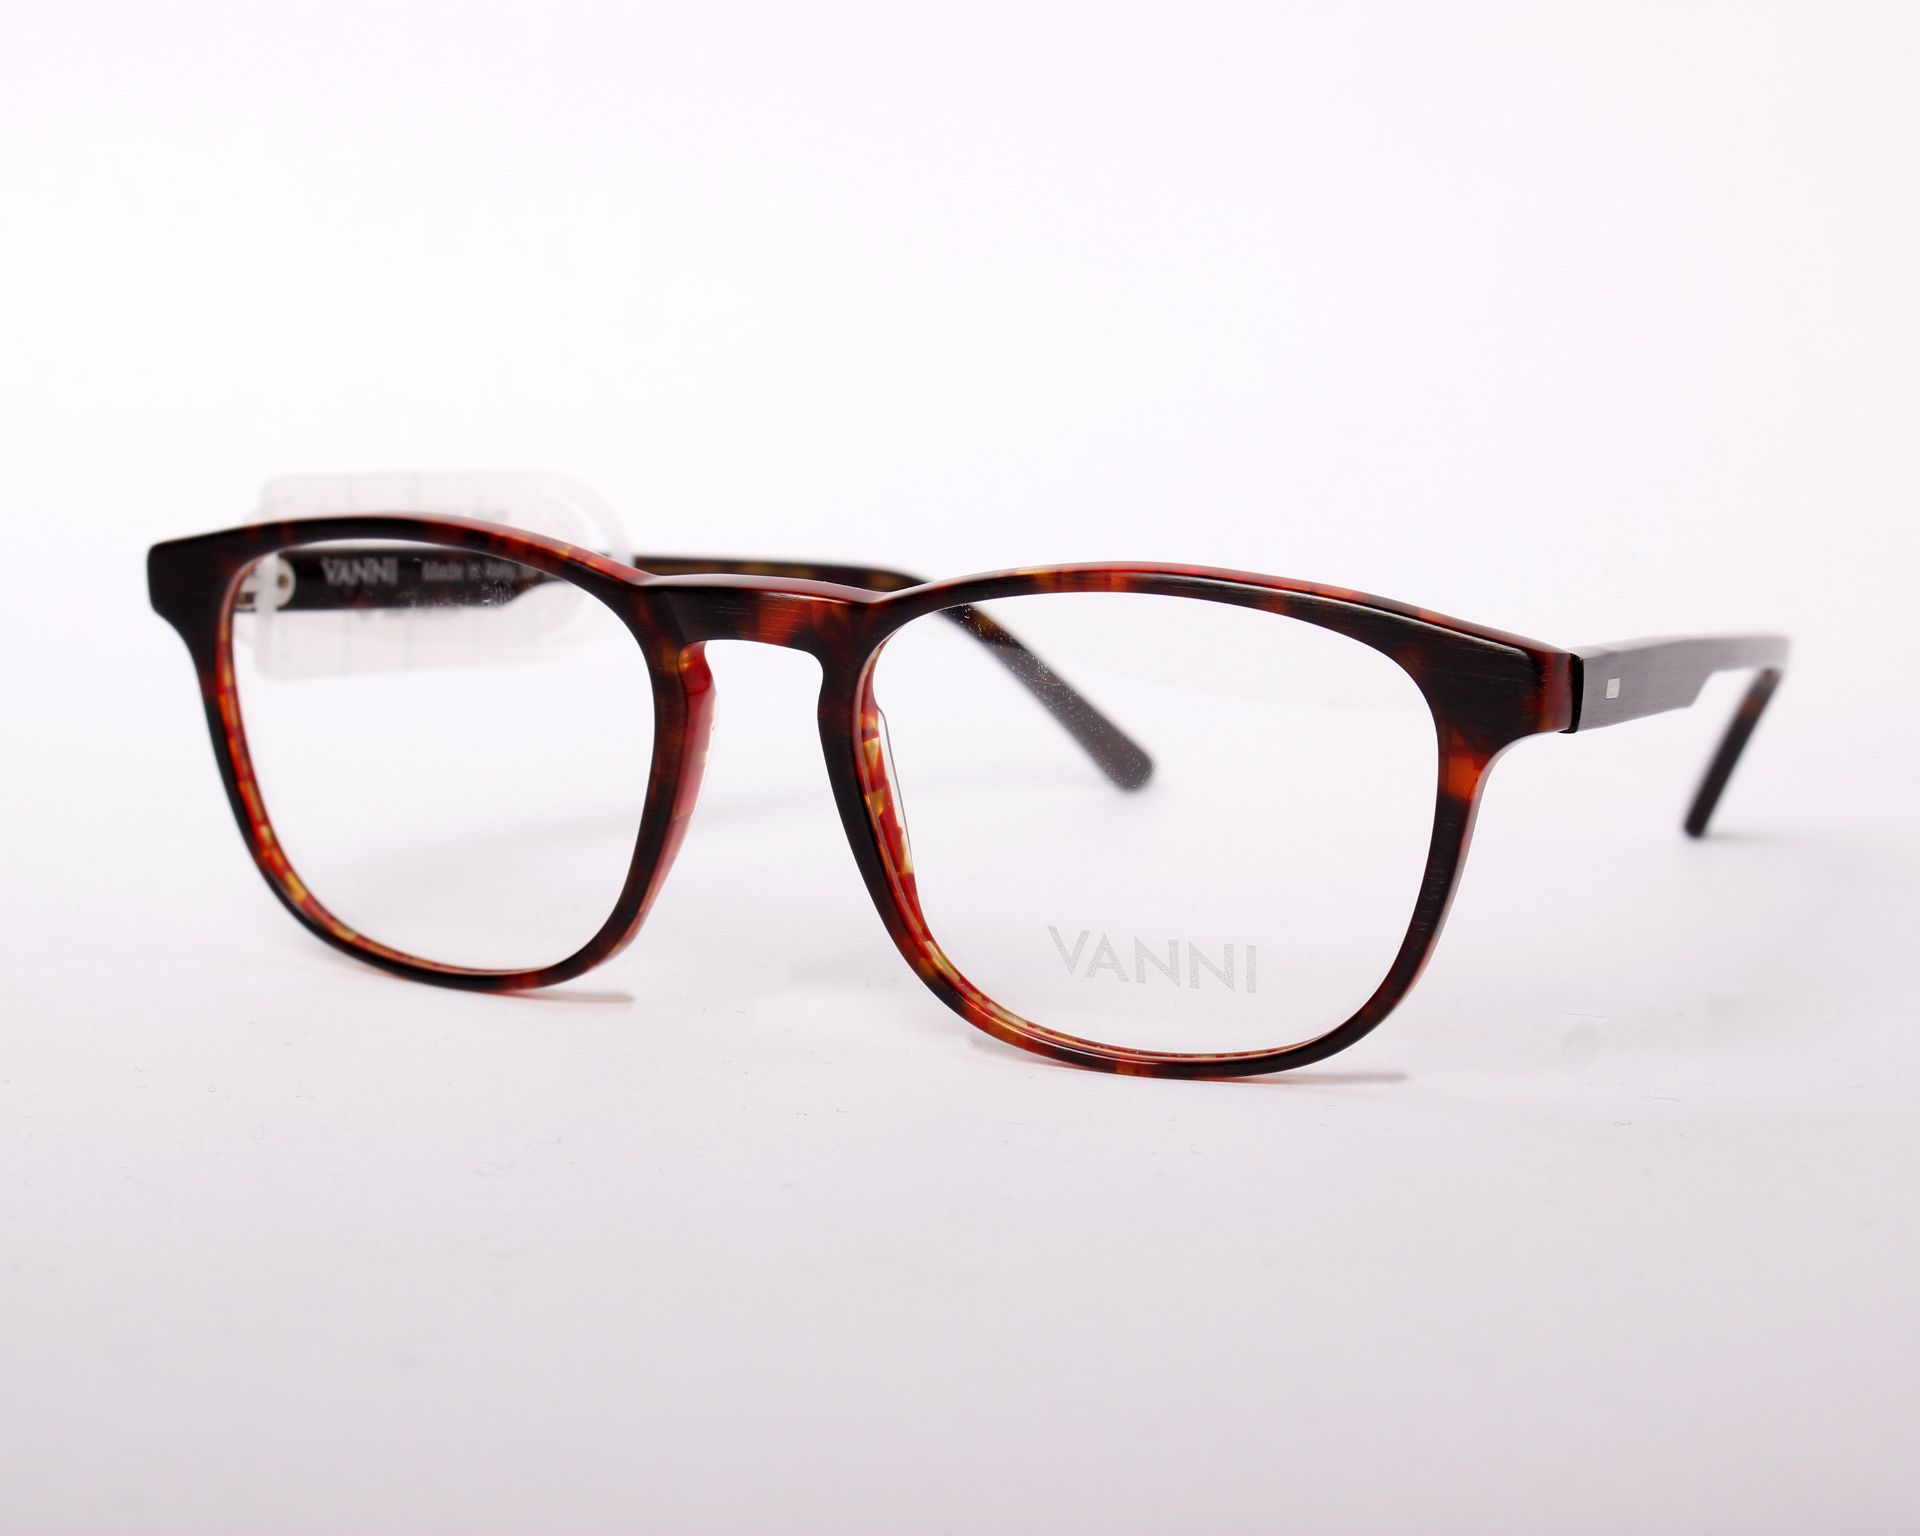 A pair of as new Vanni glasses frames with clear glass (RRP £220).